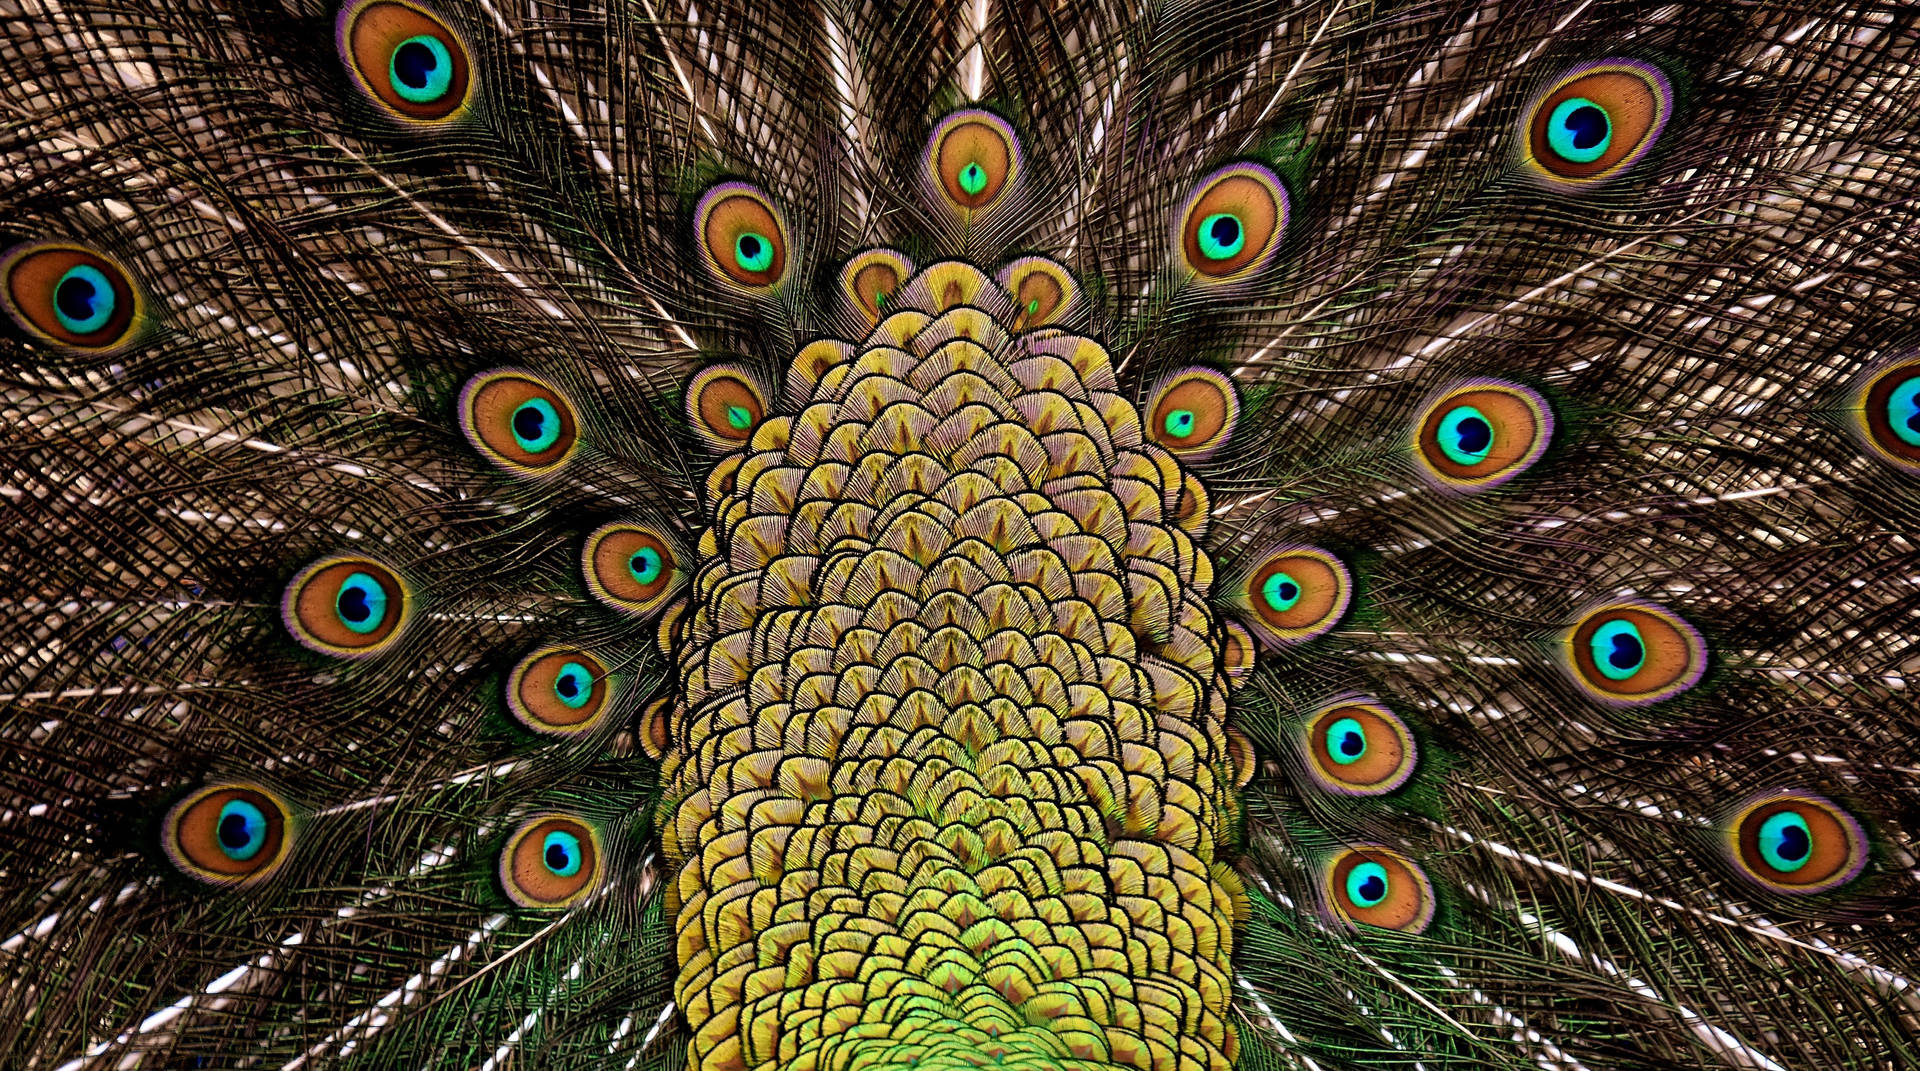 Peacock 5162X2880 Wallpaper and Background Image